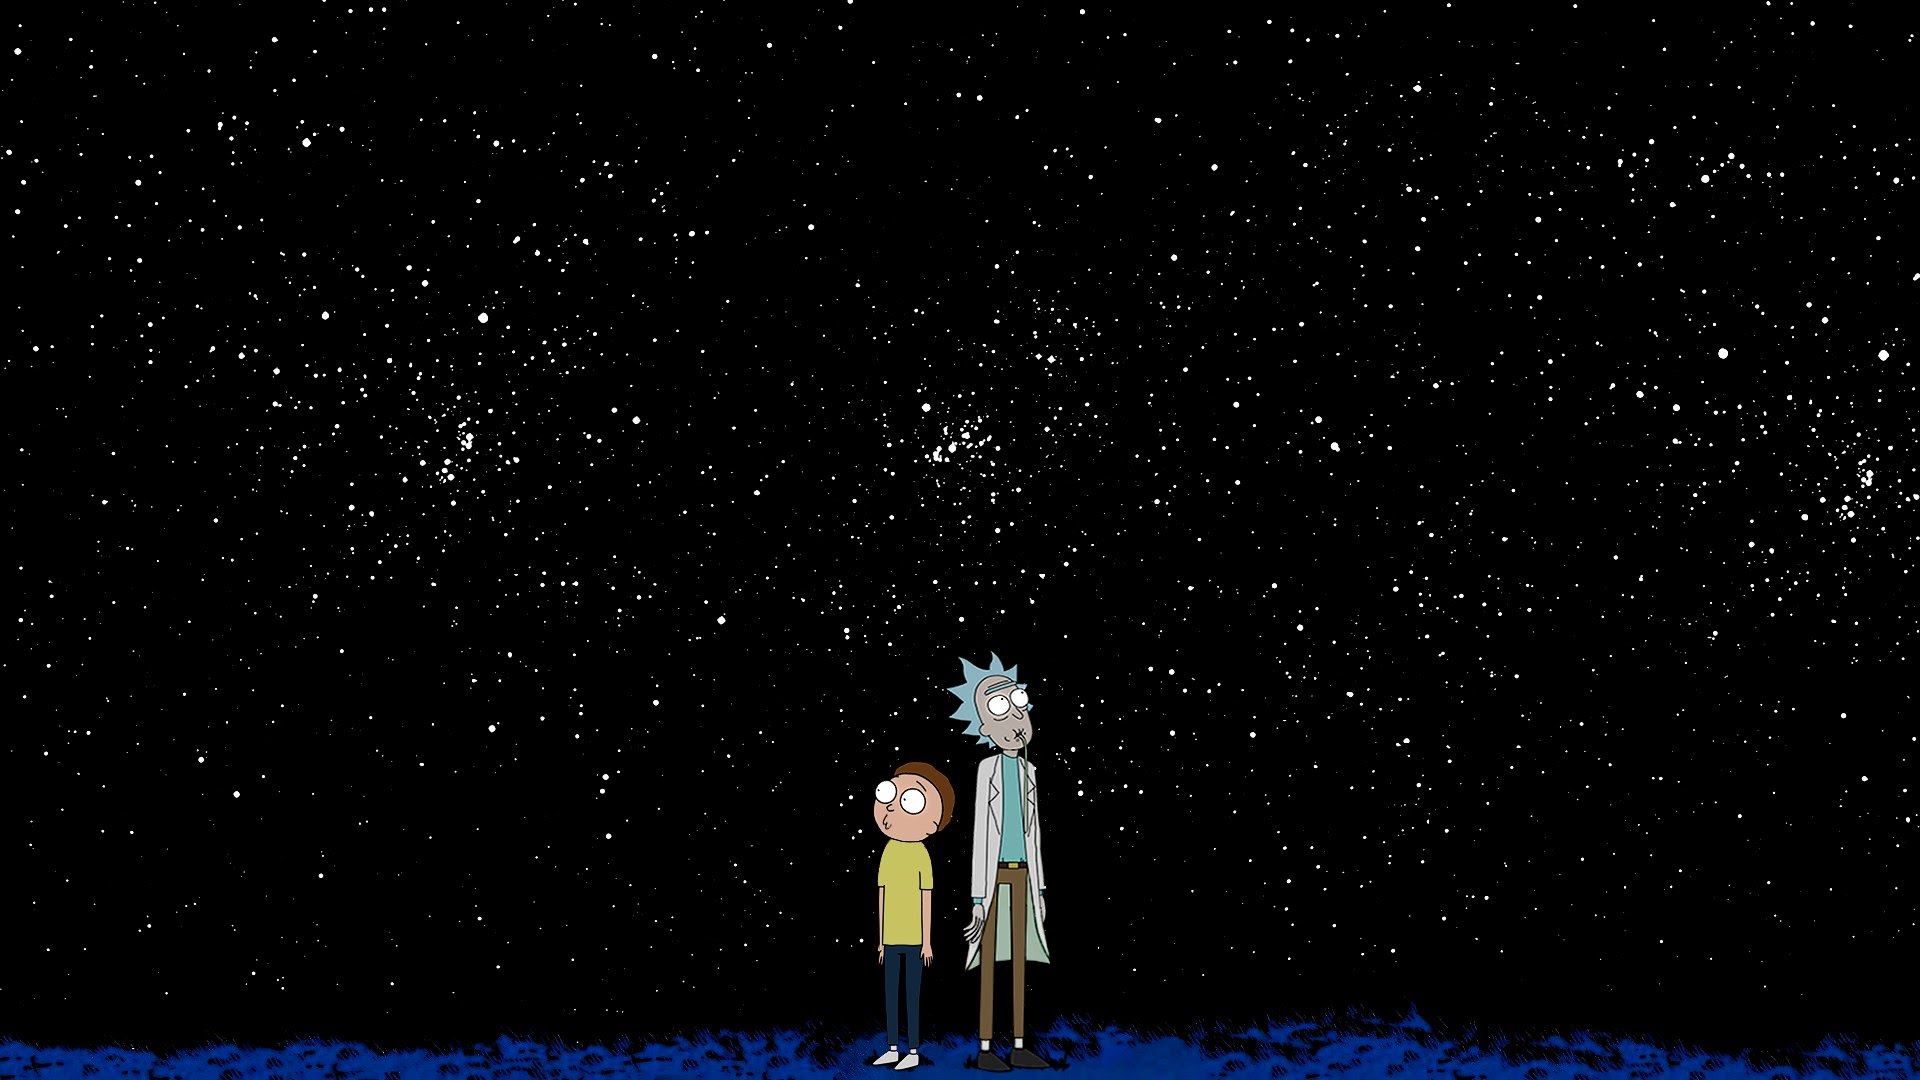 Wallpaper Rick and morty, minimal, tv series, starry night